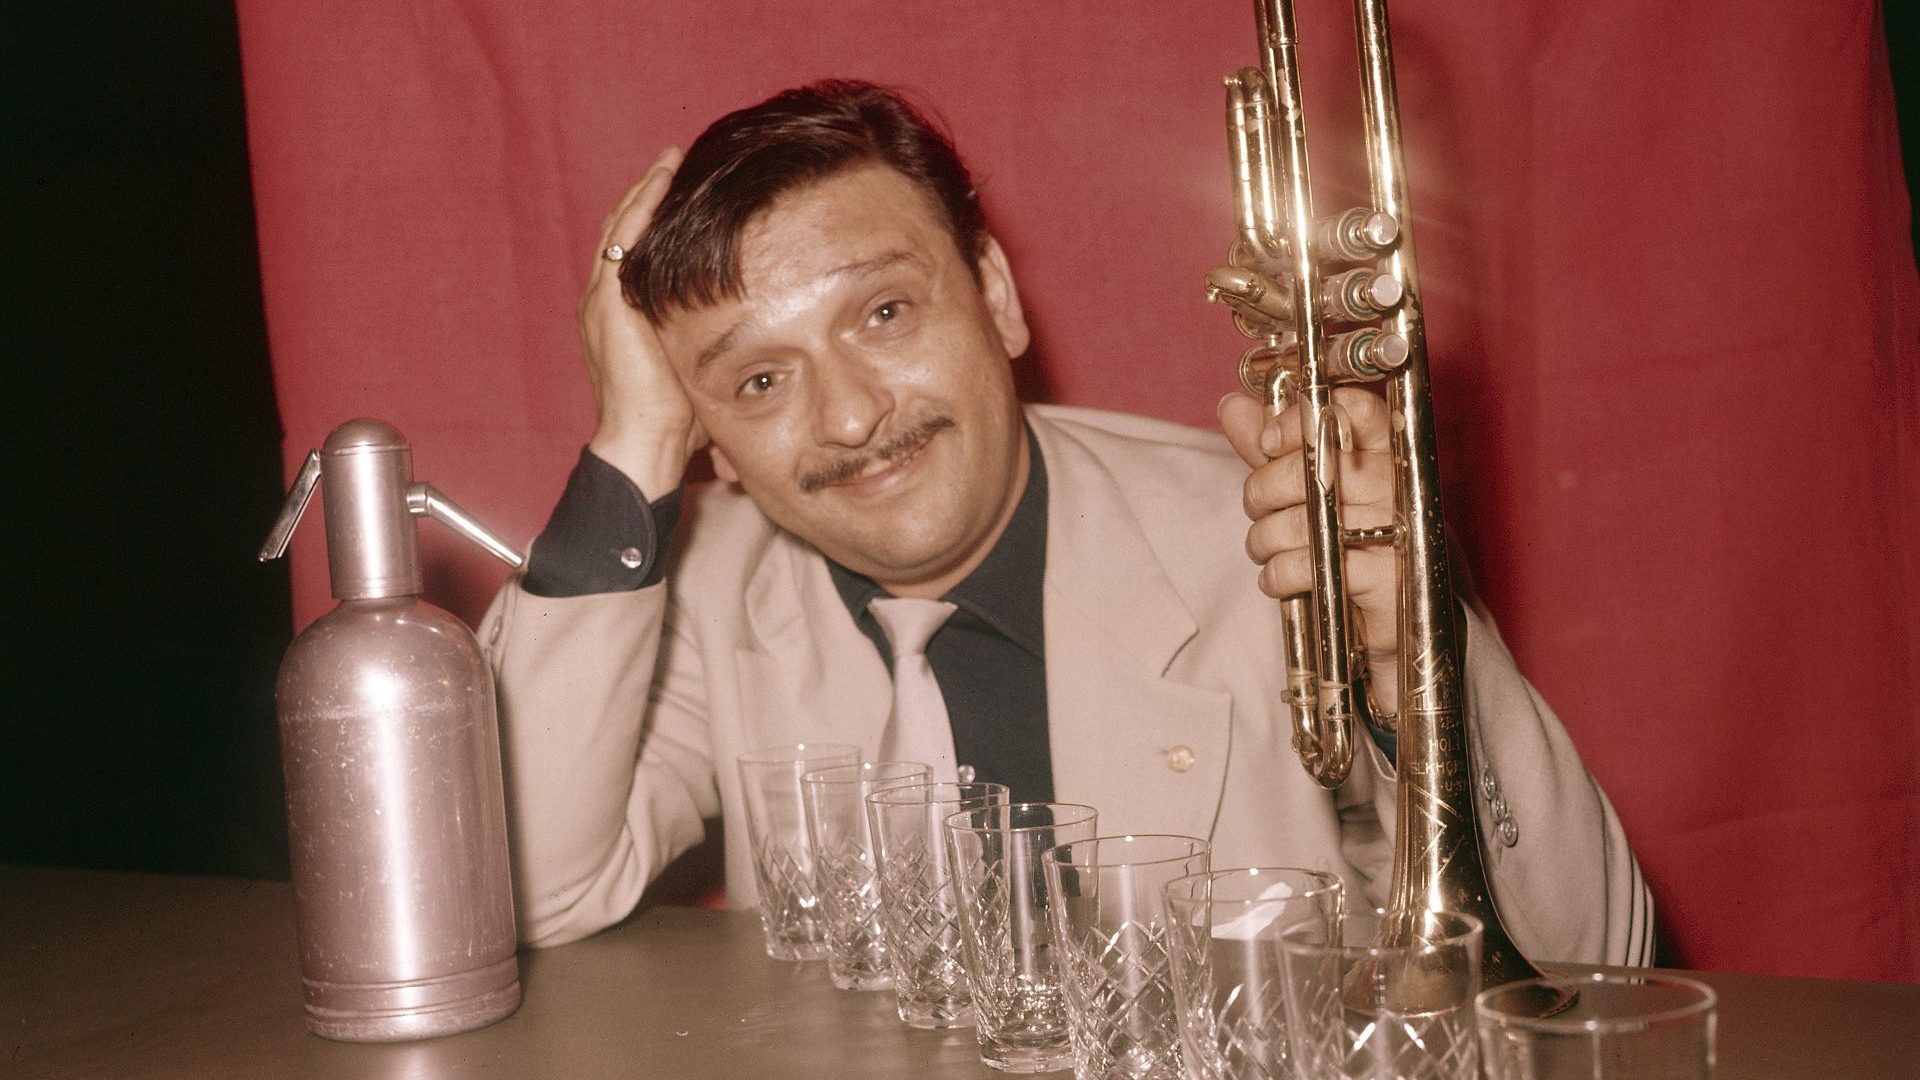 Fred Buscaglione at the height of his fame in the 1950s, working in film, television and performing in clubs. Photo: Mondadori/Getty